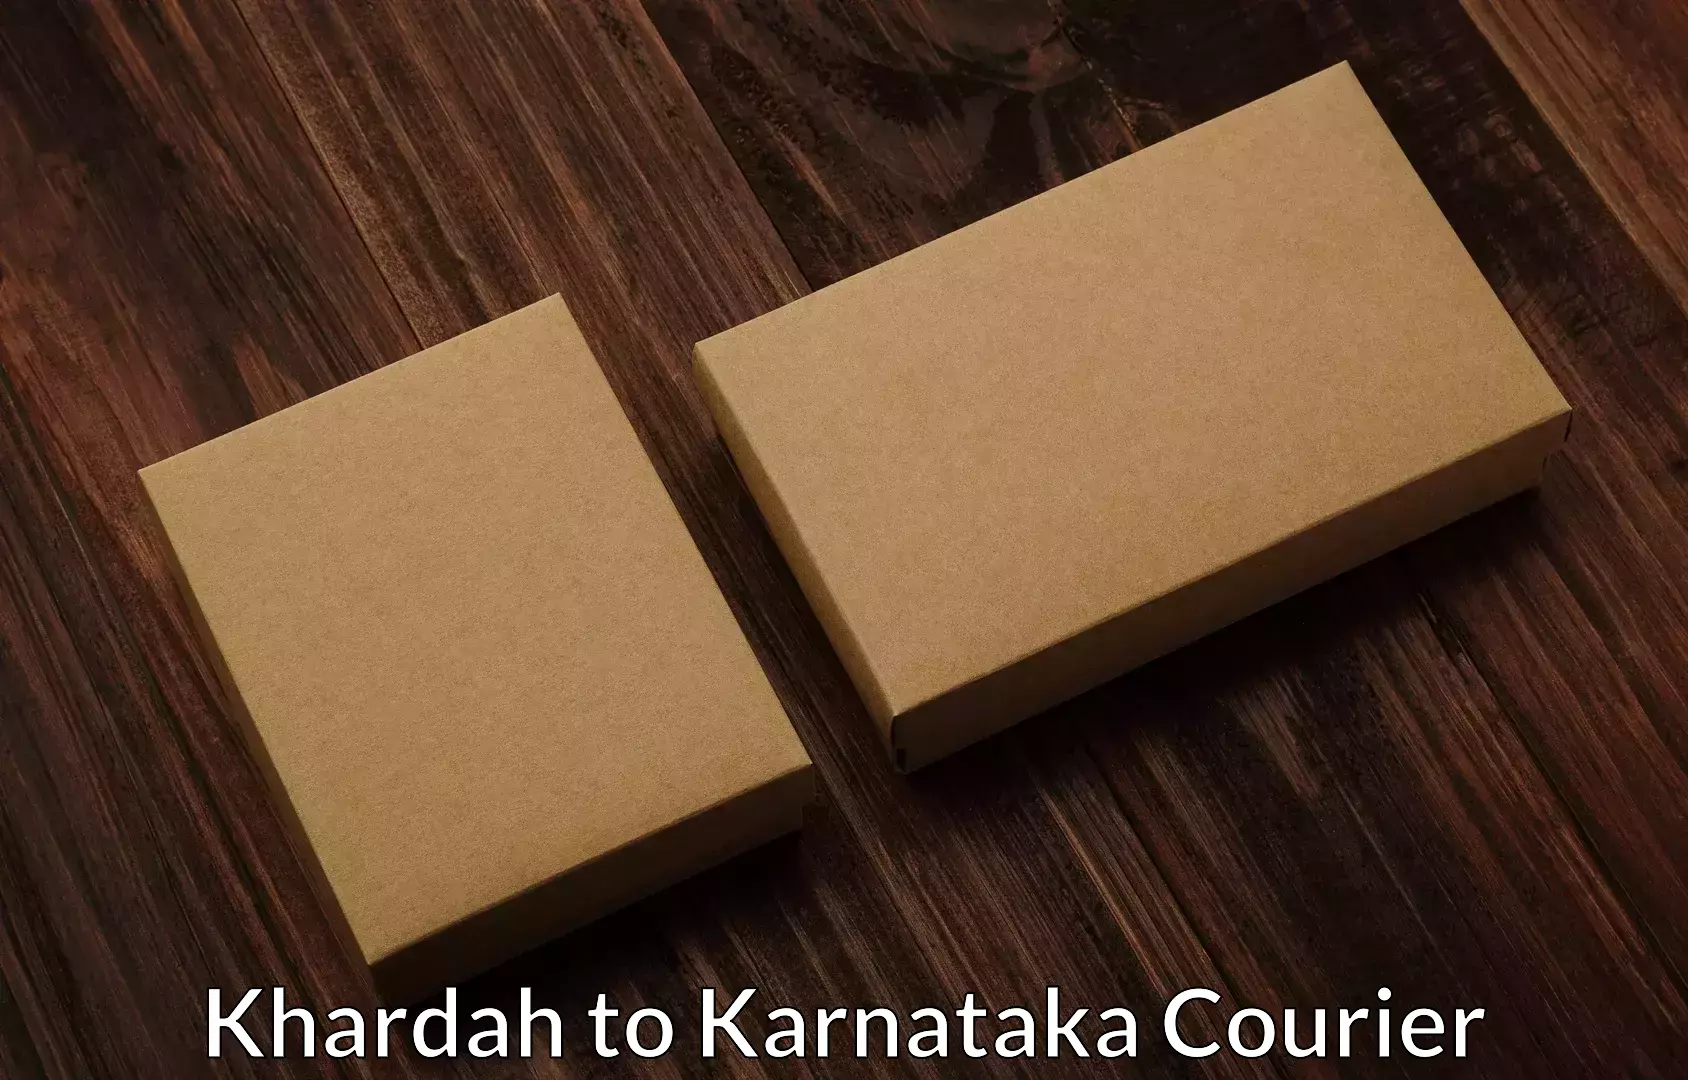 Cost-effective moving options Khardah to Mysore